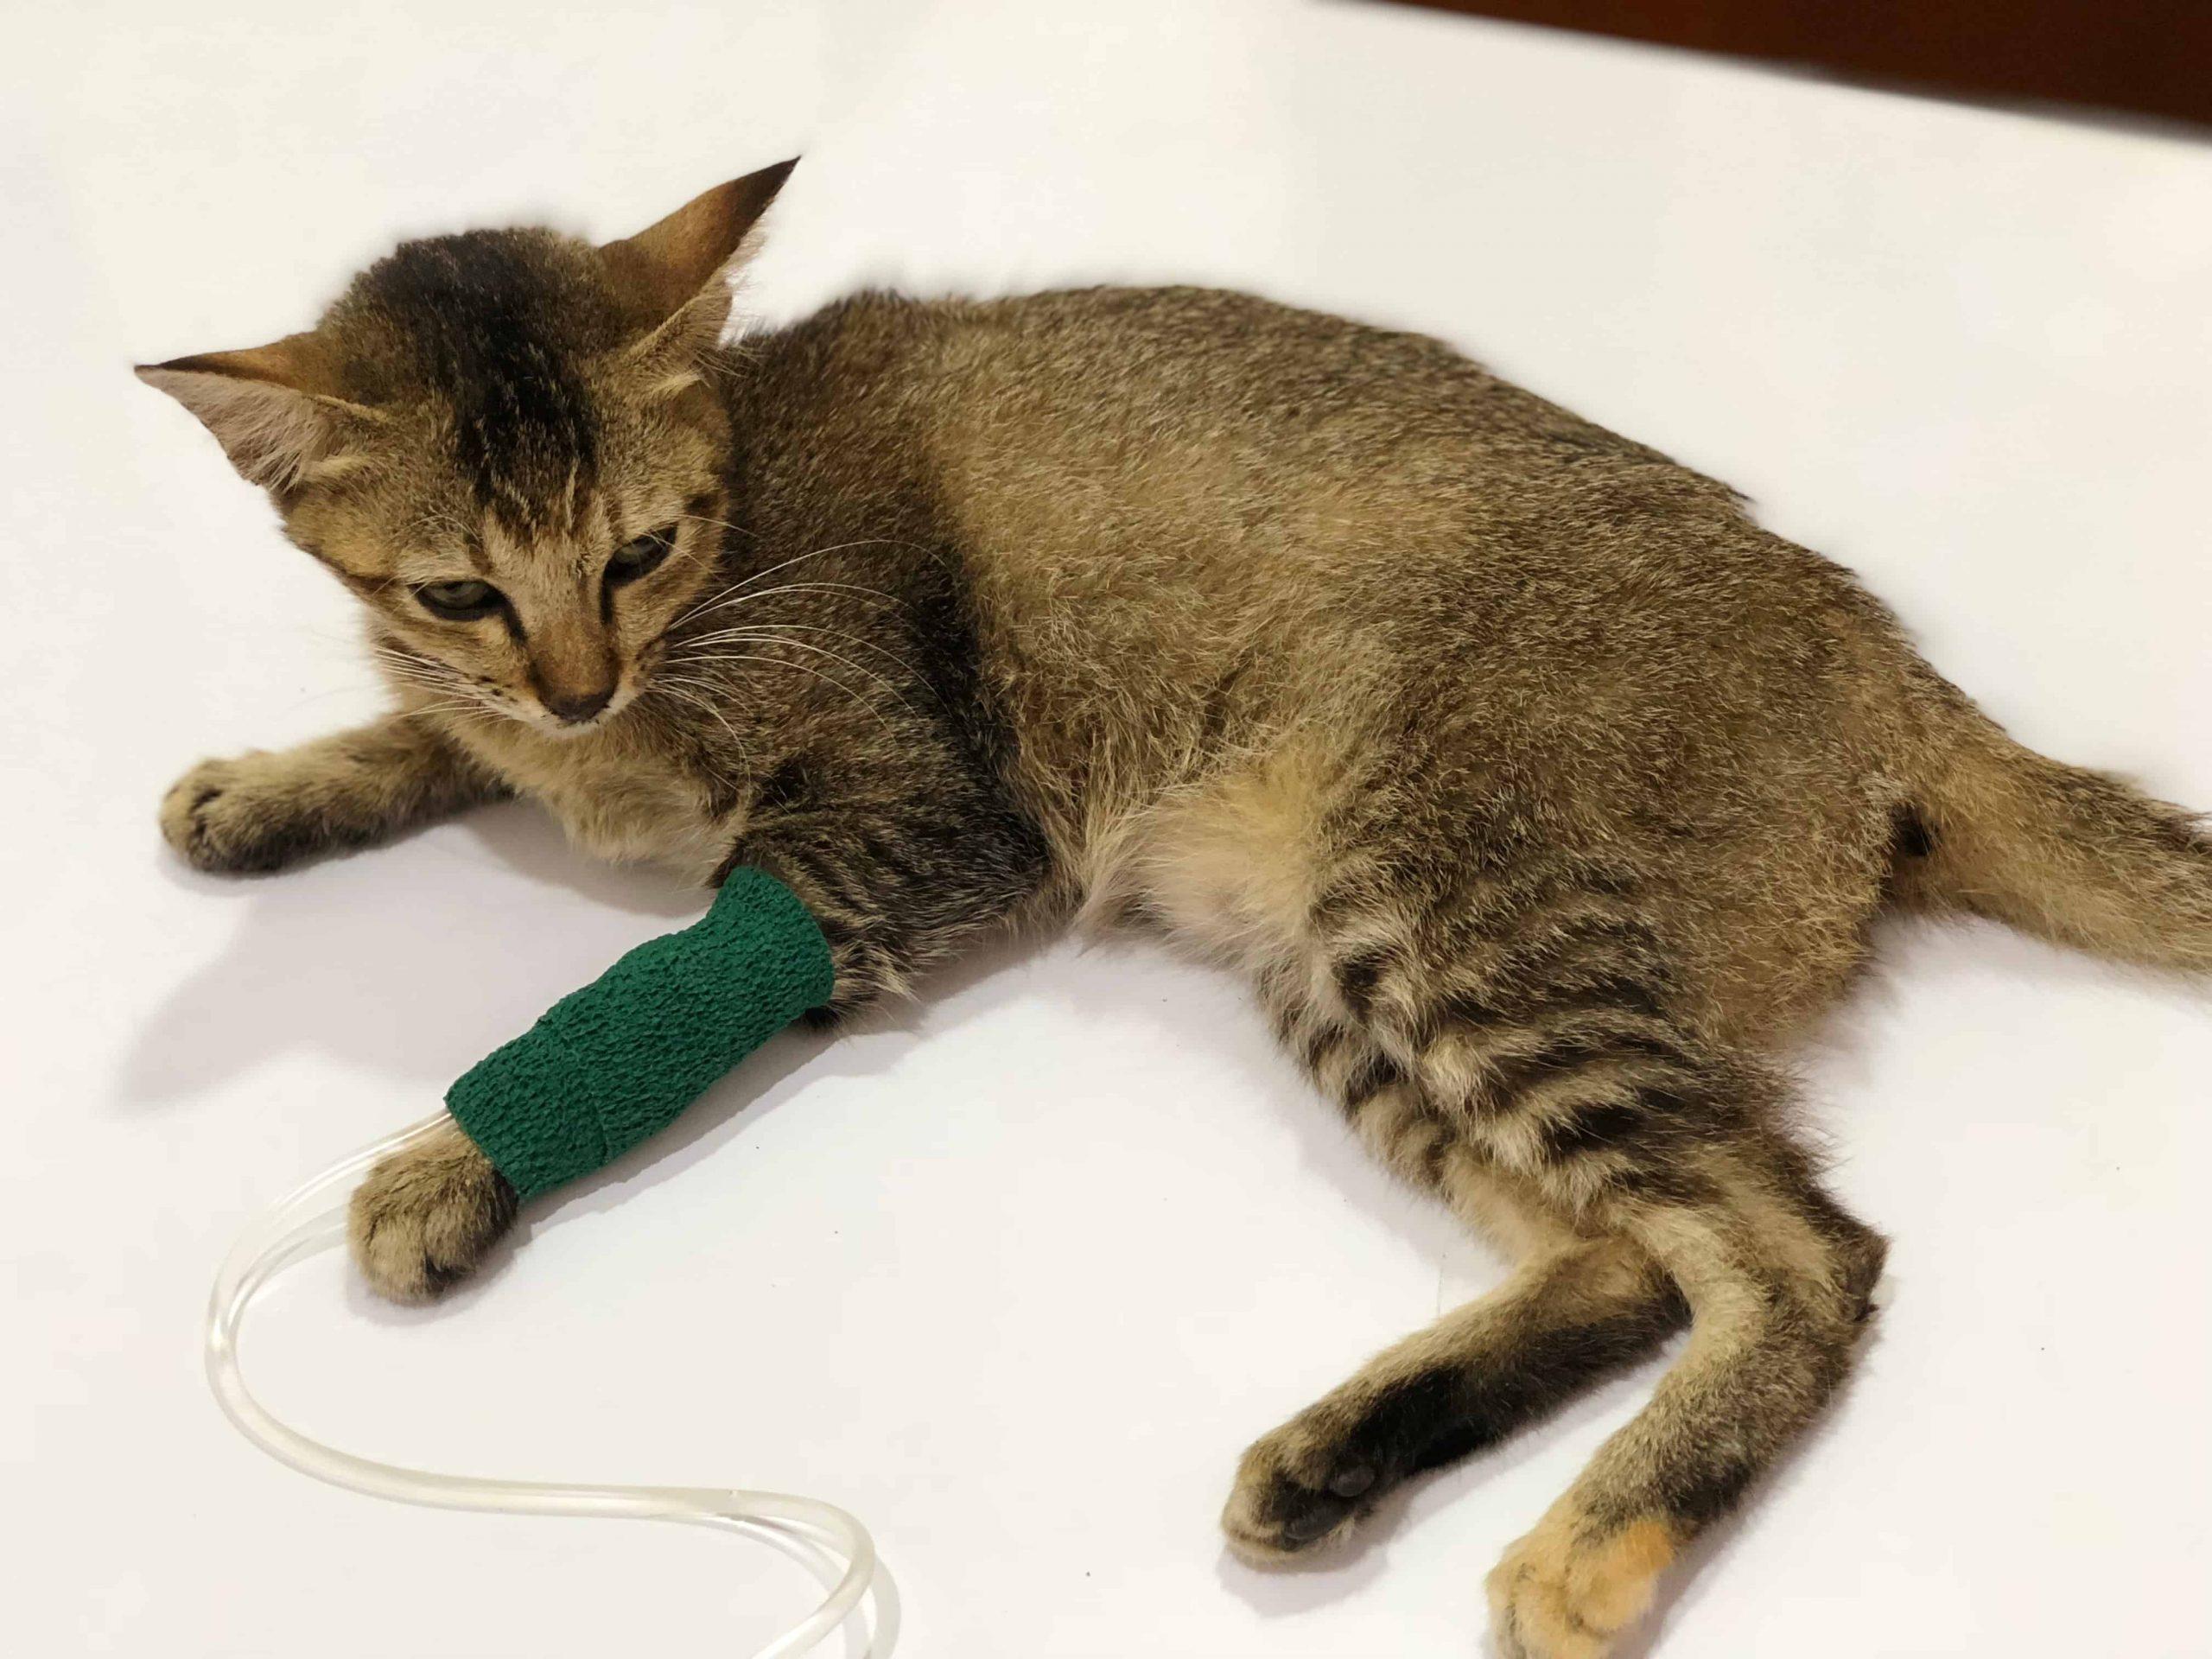 symptoms of a snake bite in cats - brown cat treatment